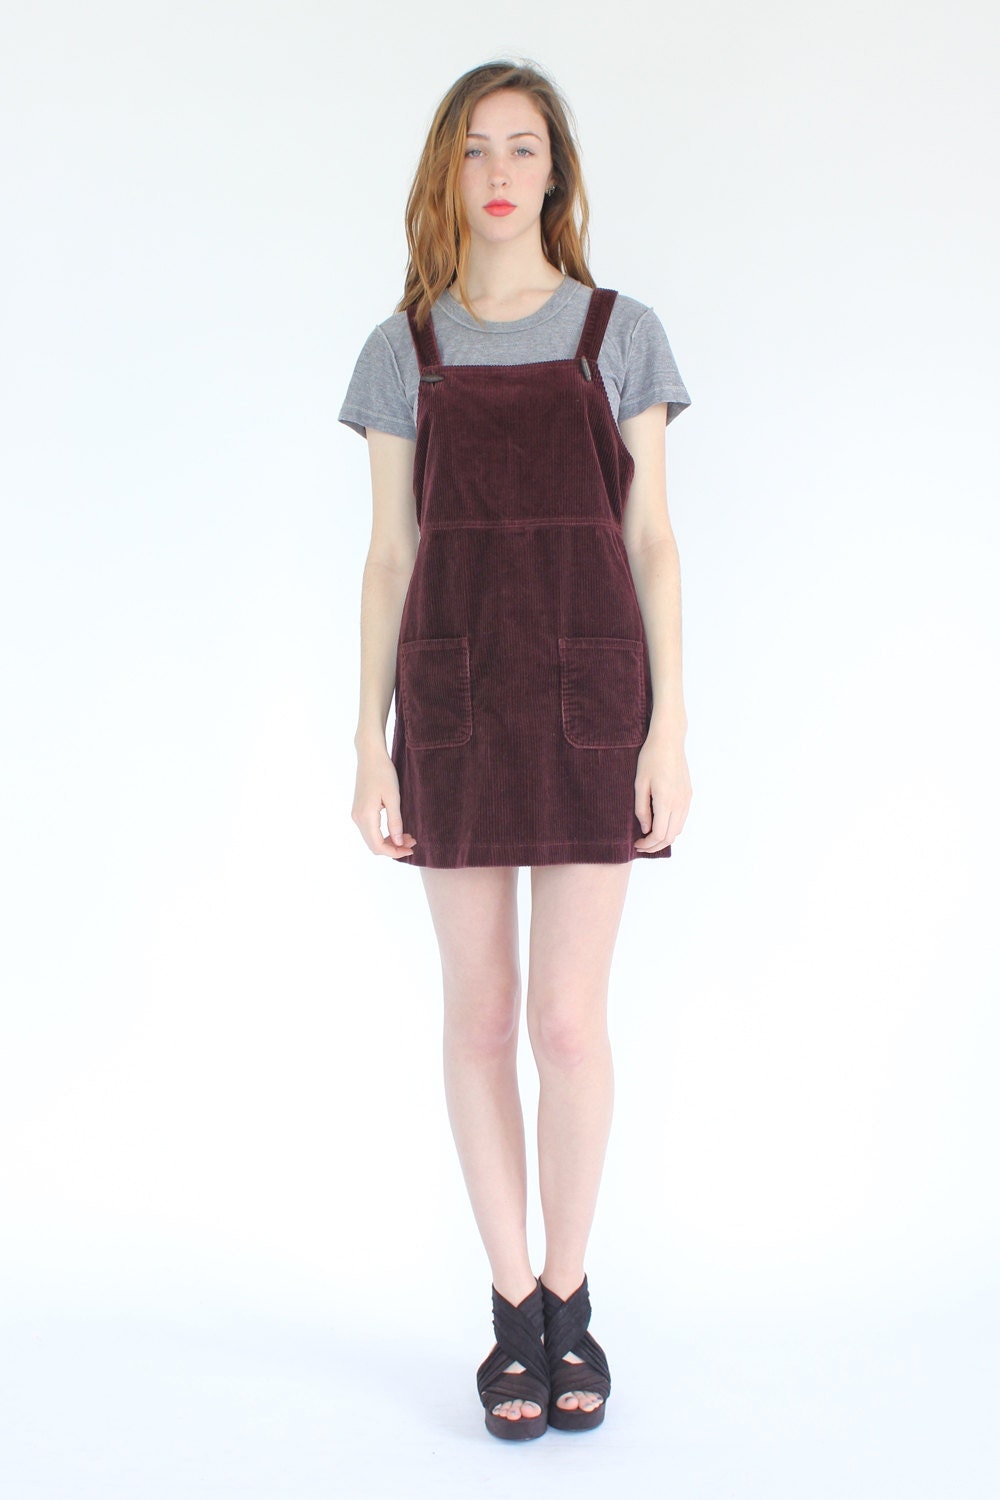 vintage 90s berry corduroy overall jumper dress